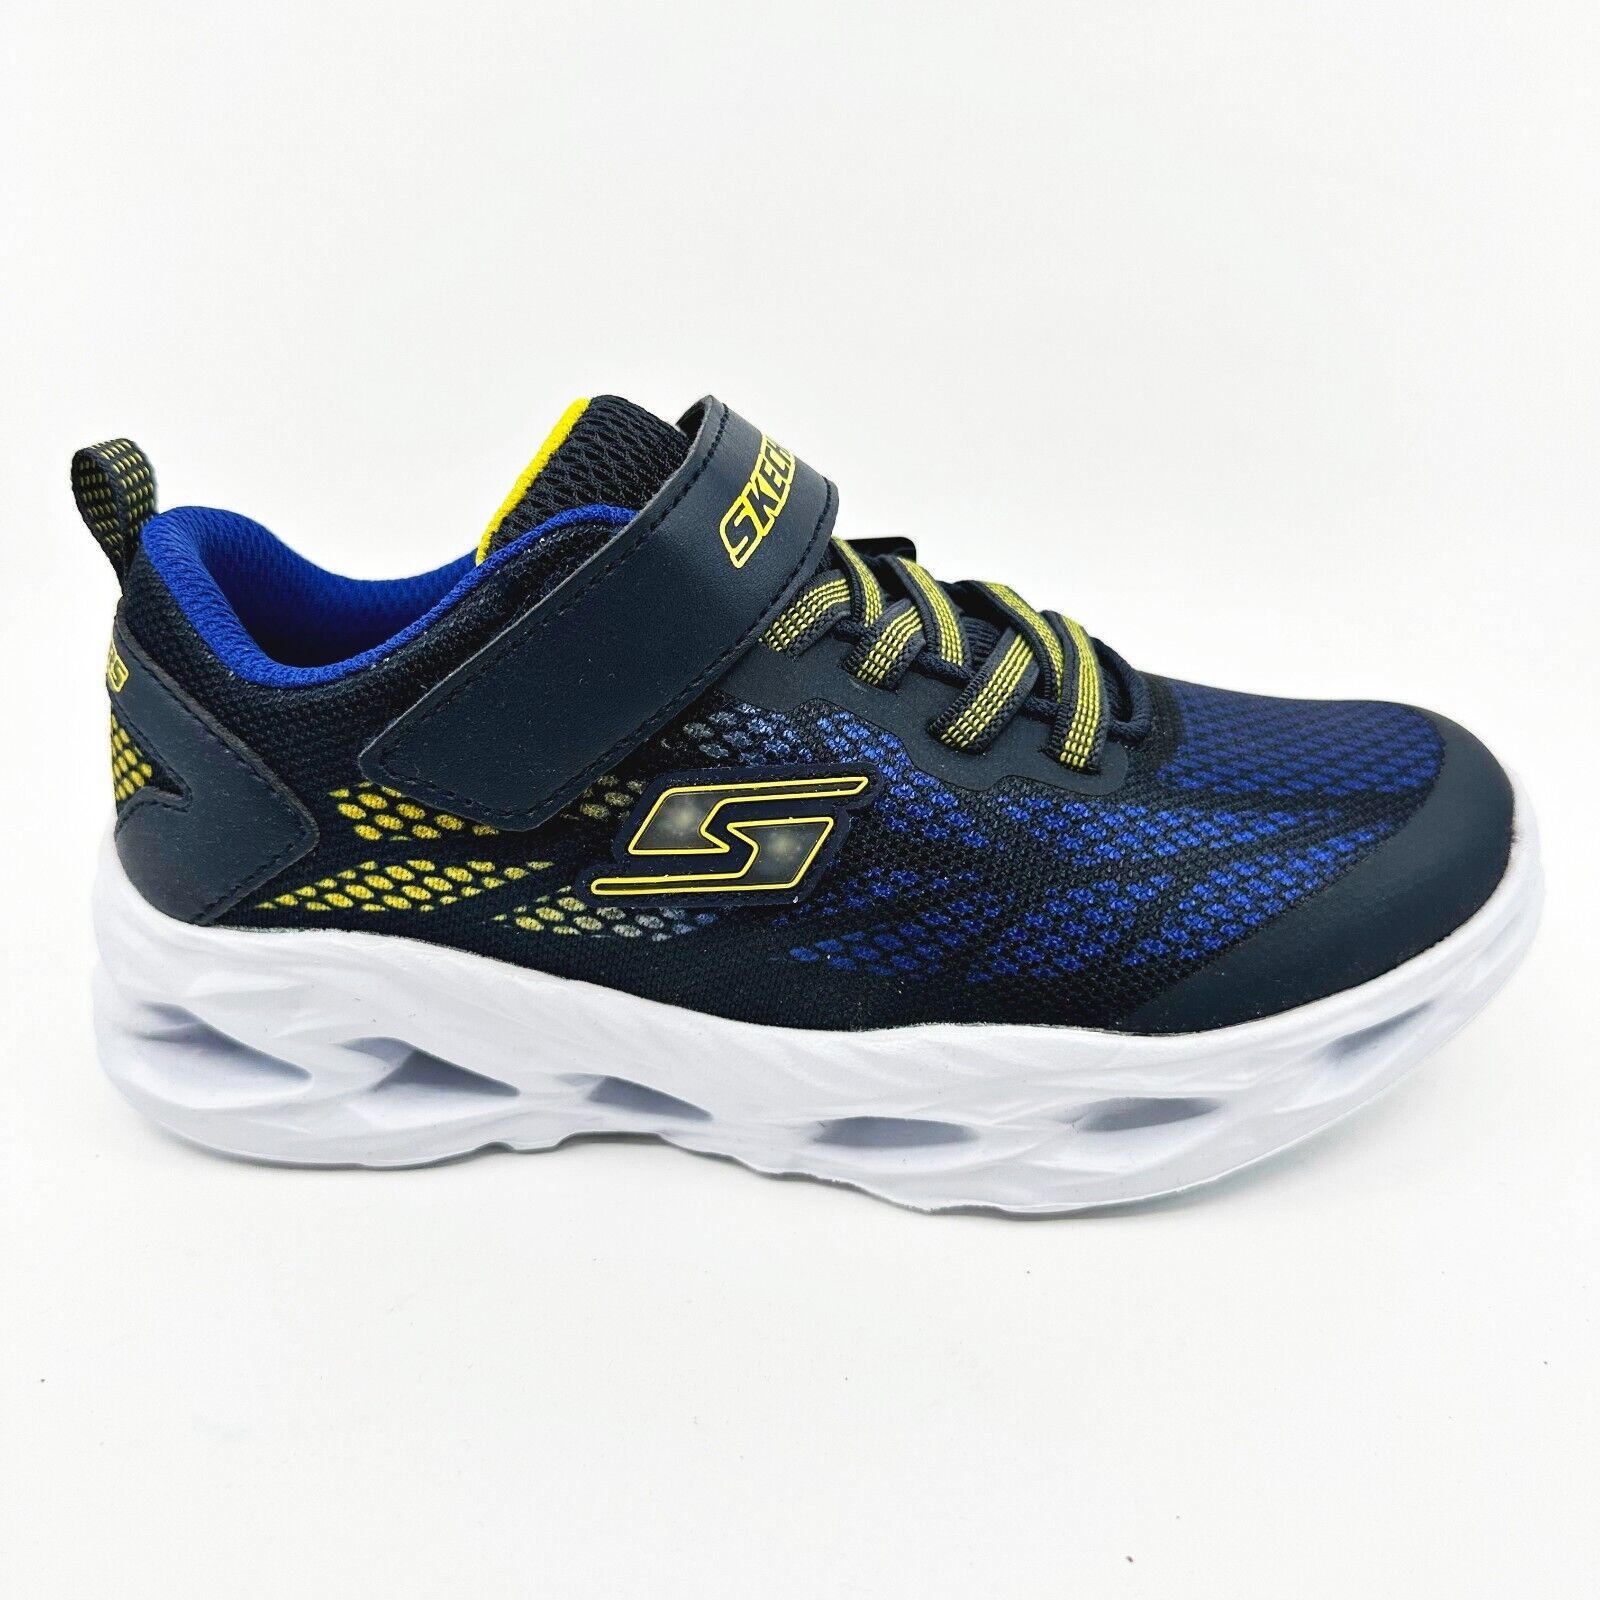 Primary image for Skechers S Lights Vortex Flash Navy Yellow Kids Boys Size 1.5 Sneakers